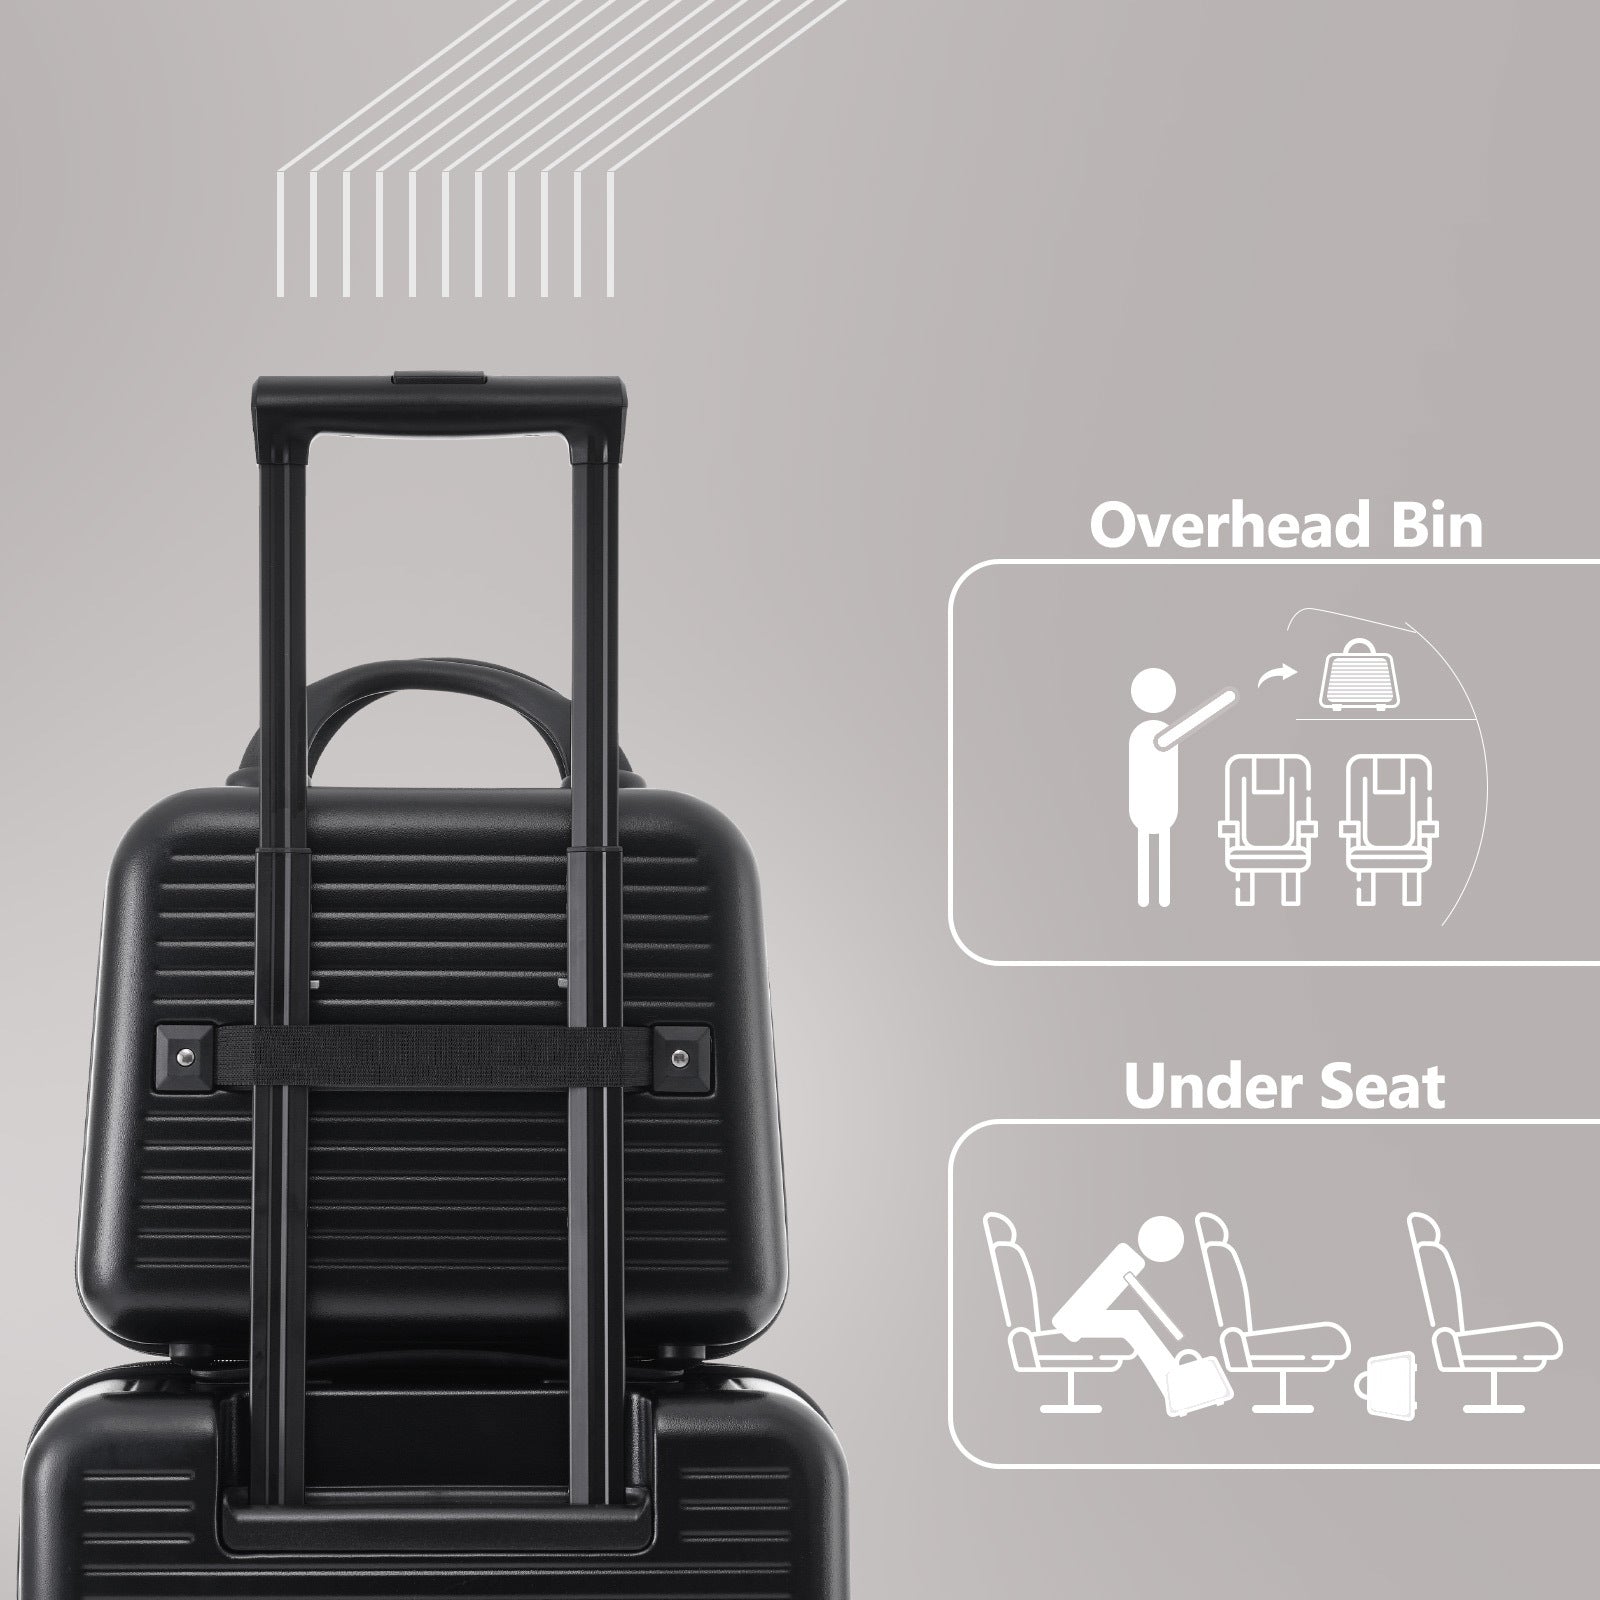 Carry on Luggage 20 Inch Front Open Luggage black-abs